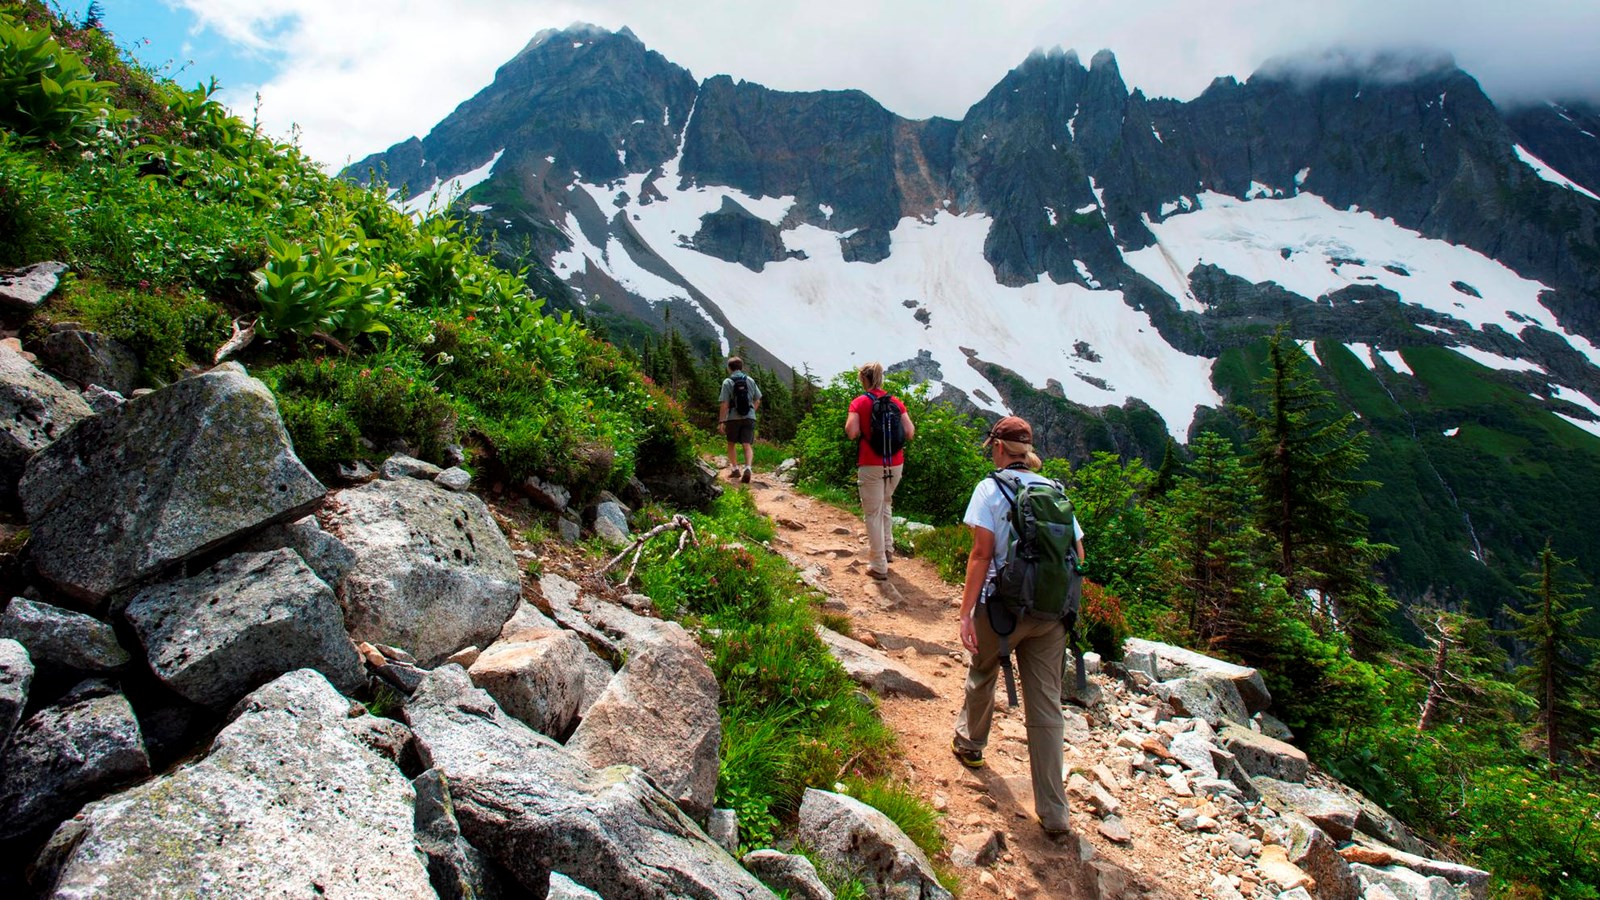 Three hikers travel a dirt path on the side of a steep grassy slope, with mountains in the distance.